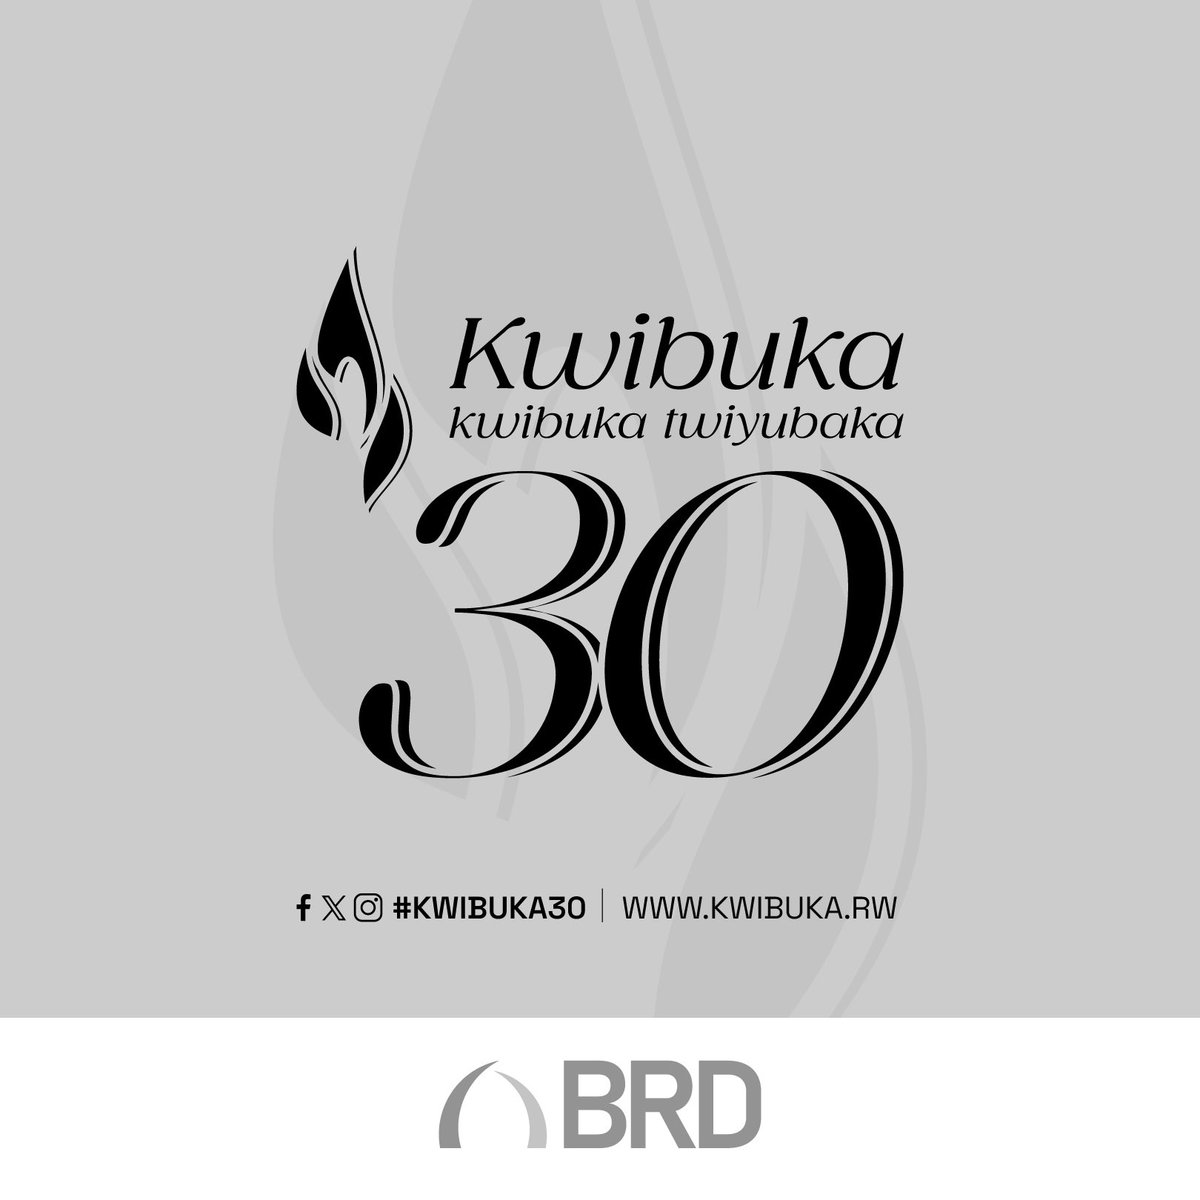 The Development Bank of Rwanda stands in solidarity with all Rwandans in this week of the 30th commemoration of the Genocide Against The Tutsi. Remember. Unite. Renew #Kwibuka30